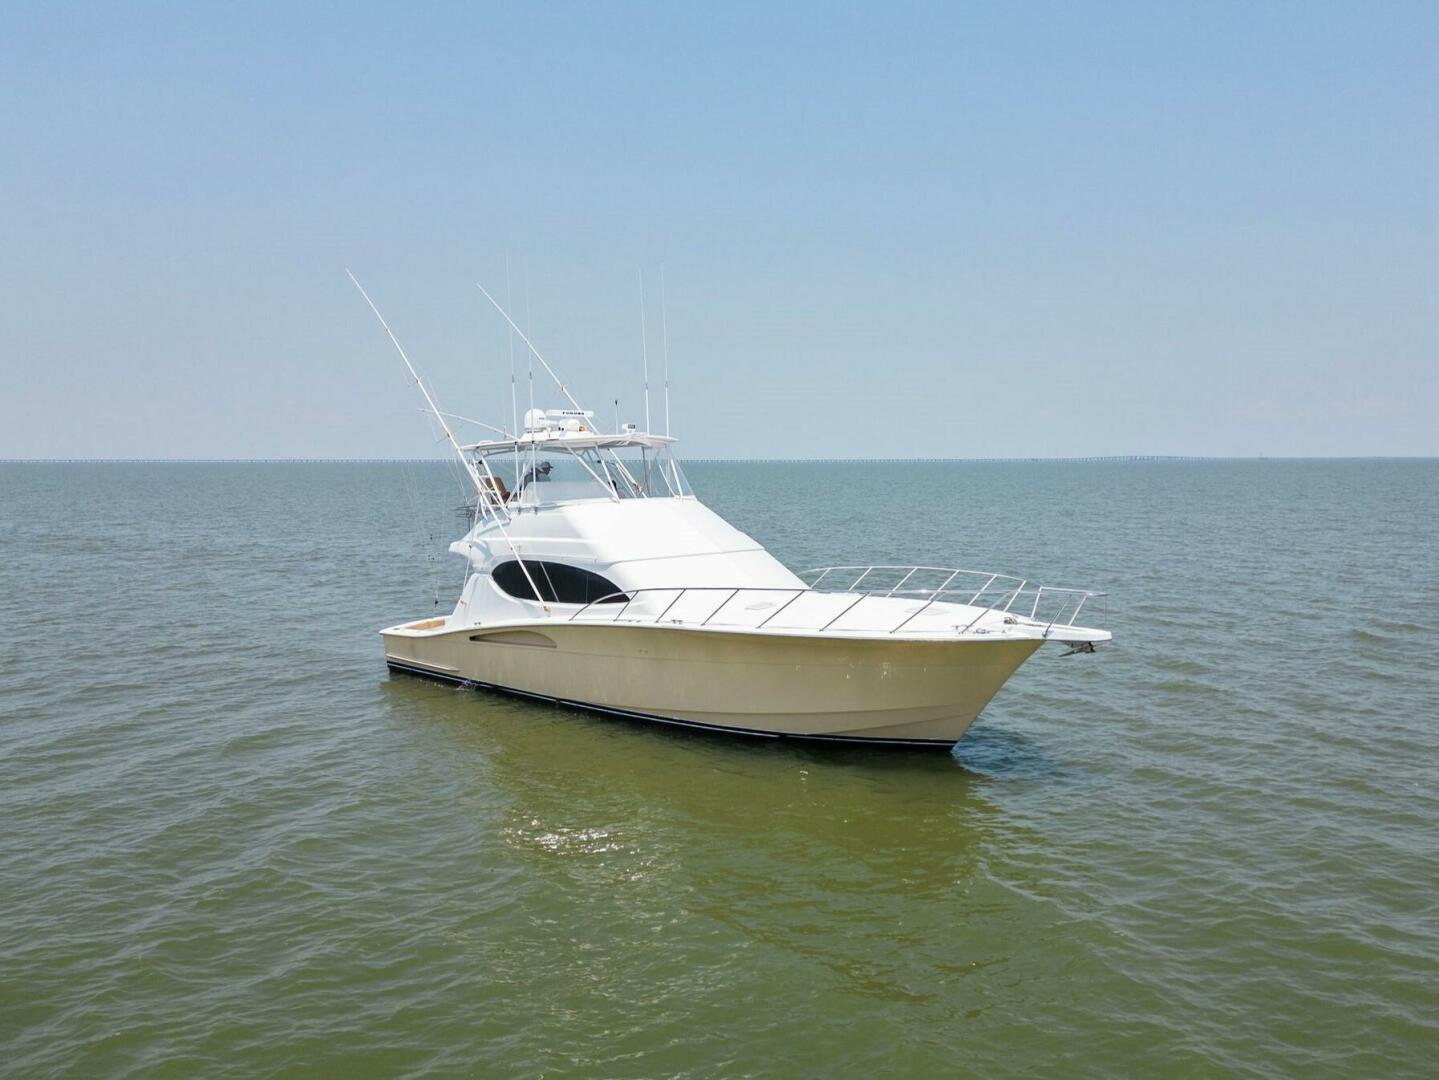 Big Boyd Yacht for Sale  54 Hatteras Yachts New Orleans, LA